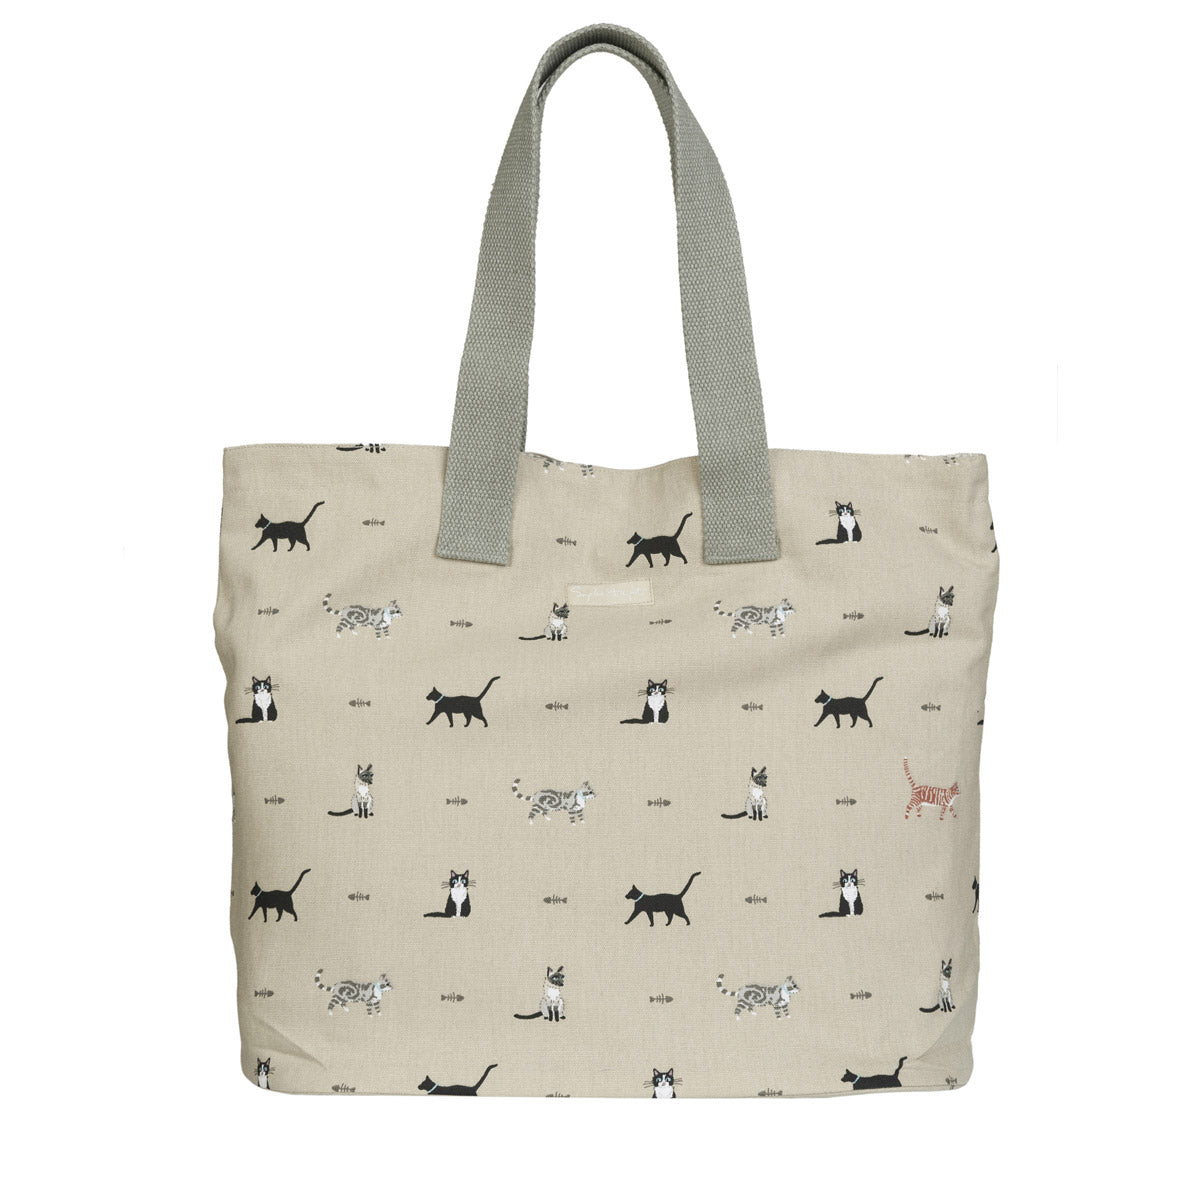 Purrfect Everyday Bag by Sophie Allport